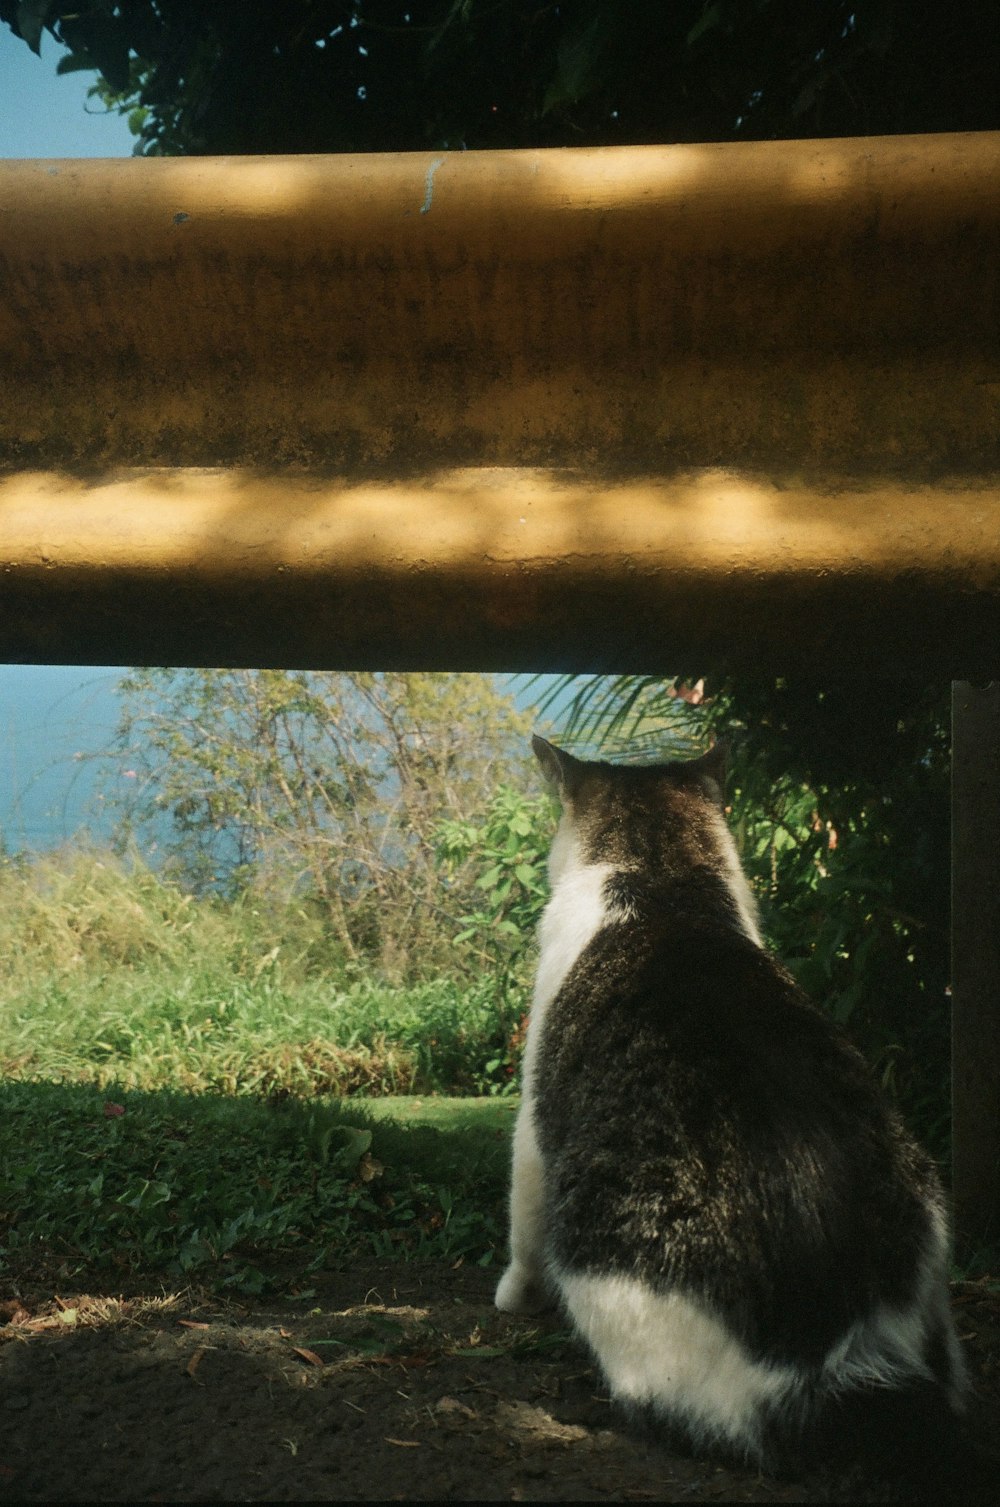 a cat sitting on the ground under a wooden structure